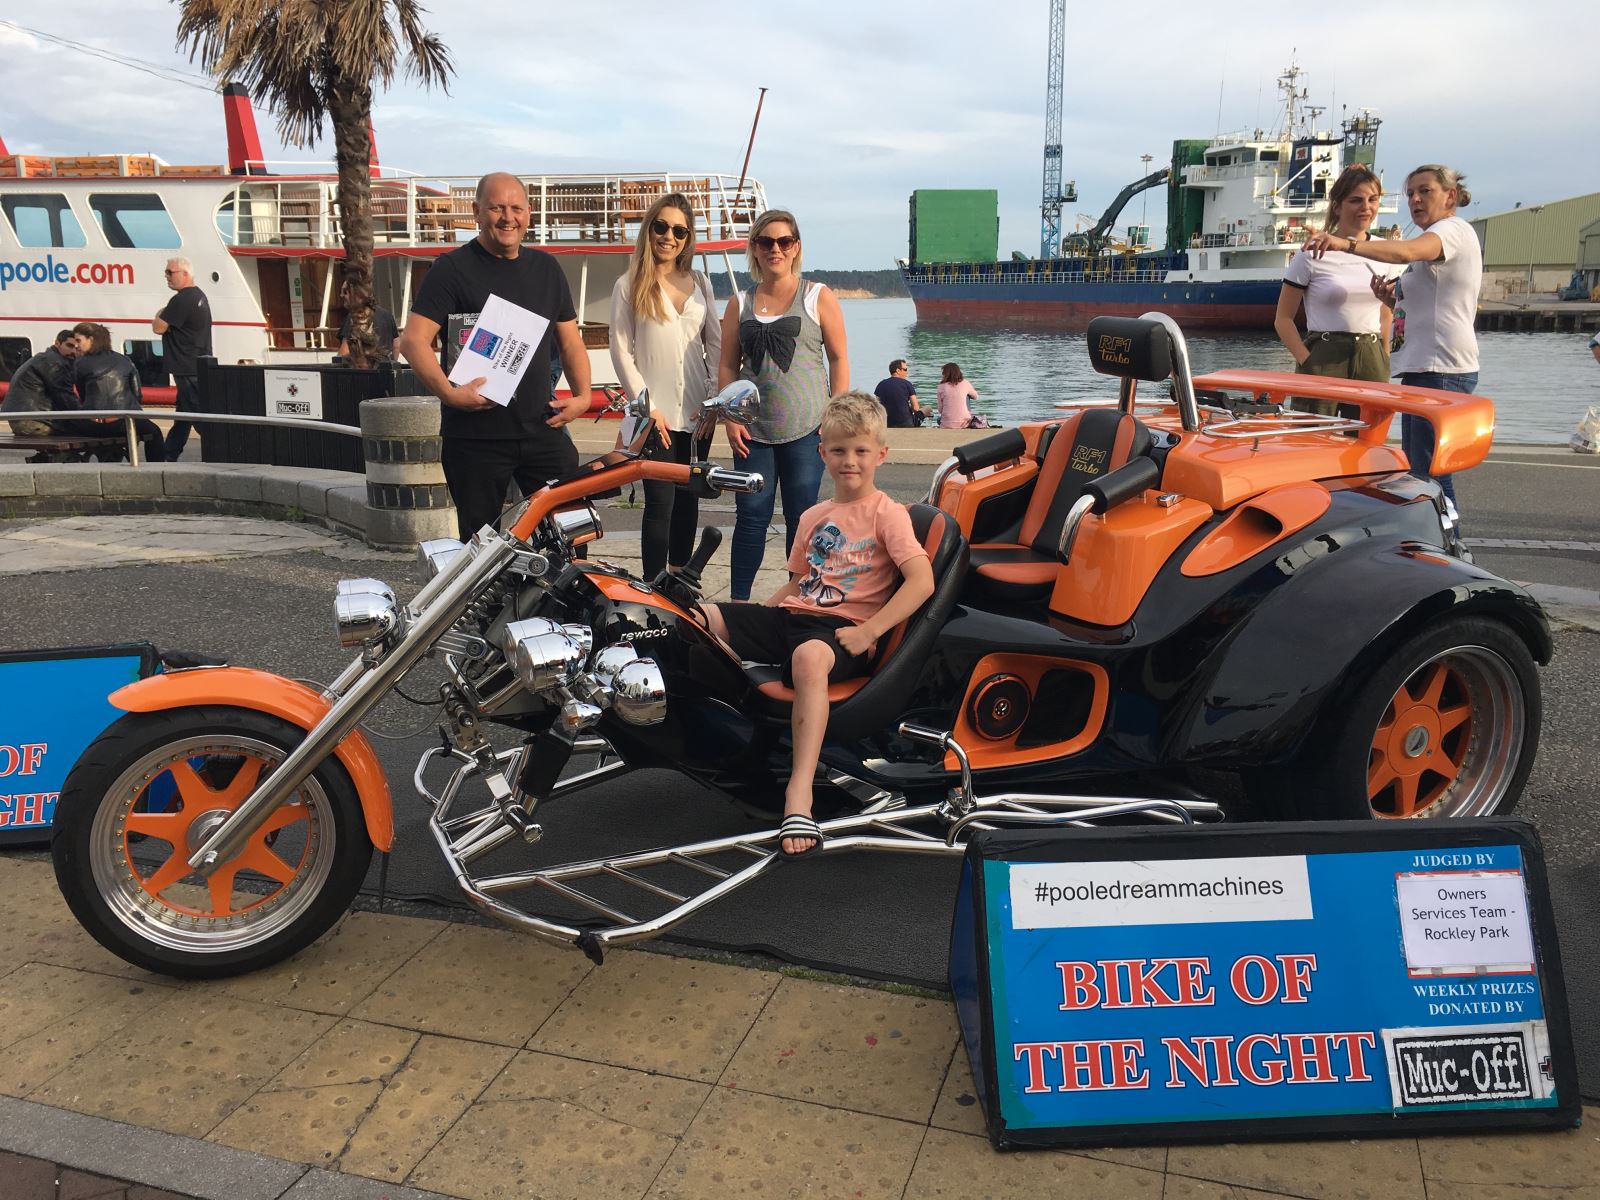 Winning motorbike pictured on Poole Quay with people around it.